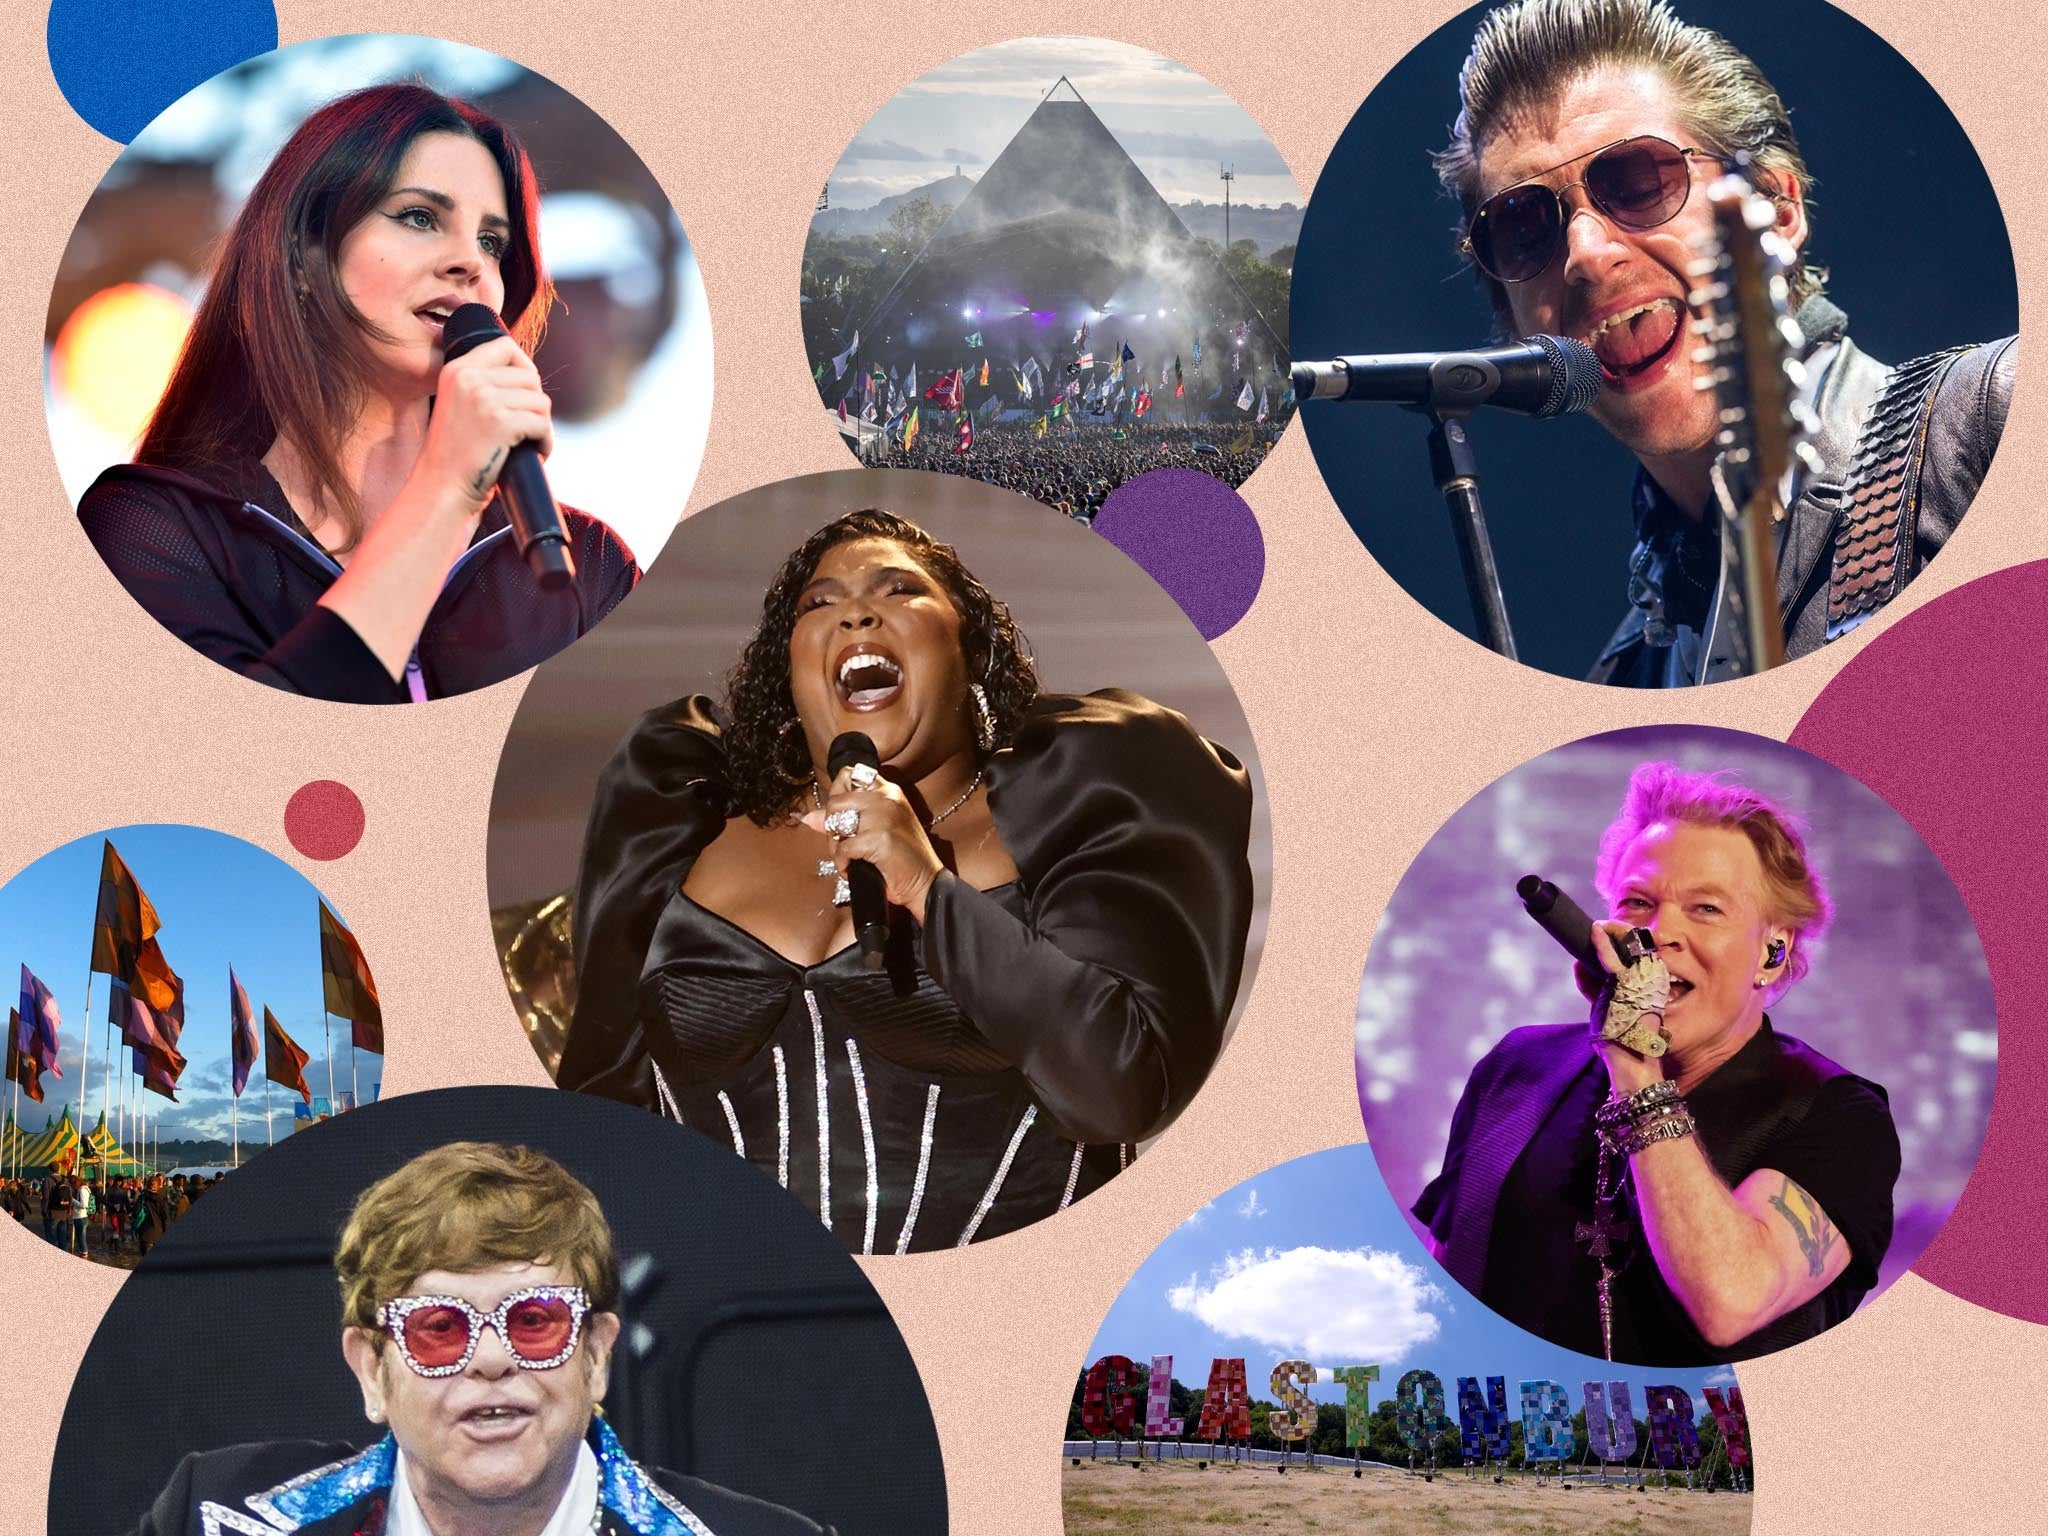 Snap Out of It: Glastonbury has booked three male headliners – Guns N’ Roses, Arctic Monkeys and Elton John – this year